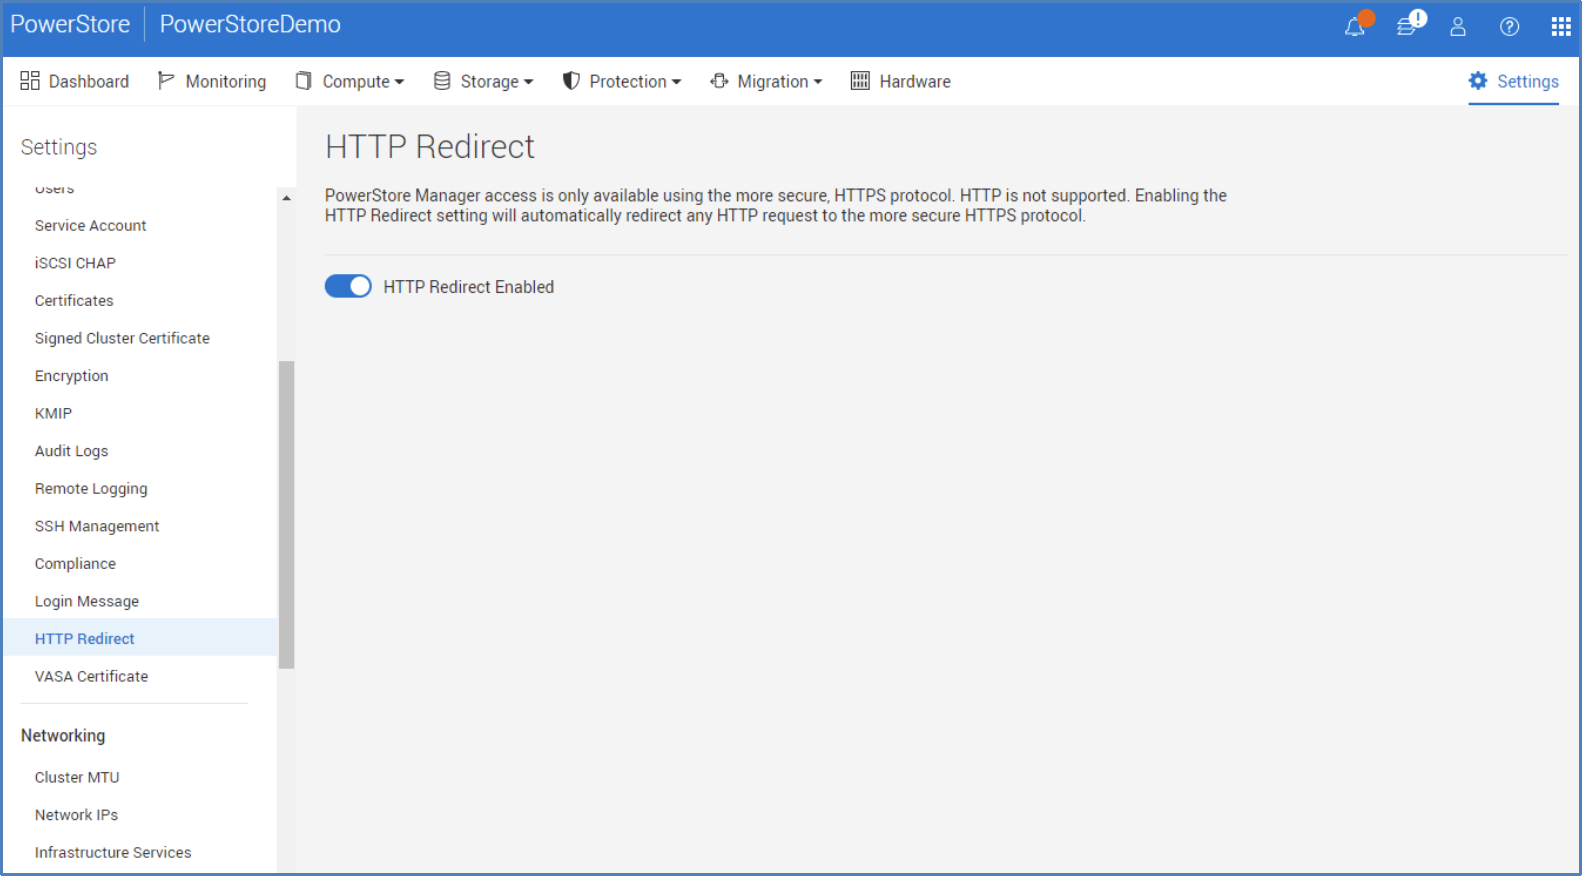 The HTTP Redirect feature allows automatic redirection to HTTPS when PowerStore Manager is accessed.